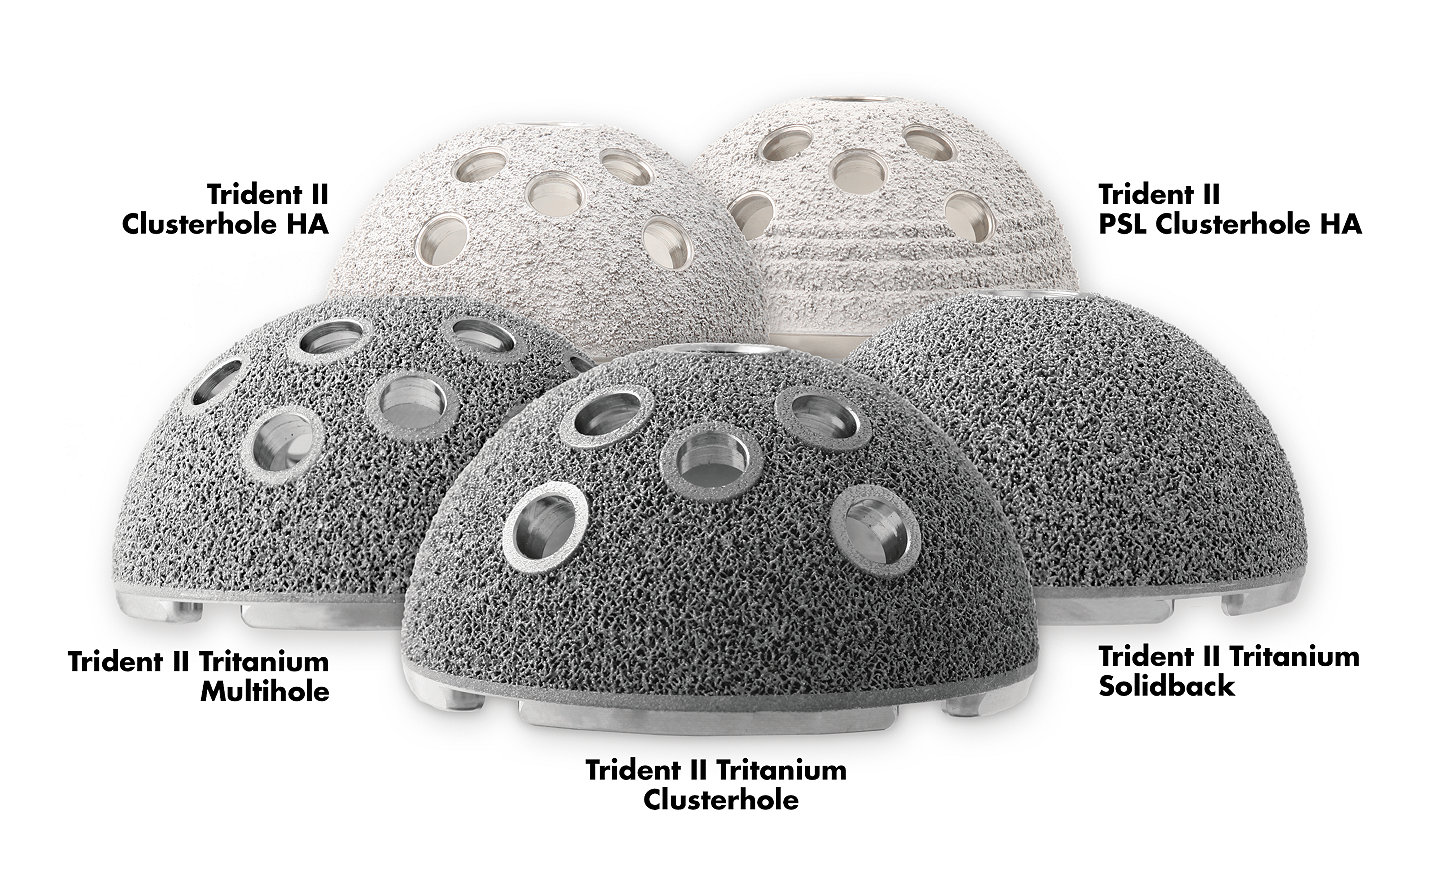 Image of the Trident II Acetabular Cup System featuring: Trident II Clusterhole HA, Trident II PSL Clusterhole HA, Trident II Tritanium Multihole, Trident II Tritanium Clusterhole and Trident II Tritanium Solidback